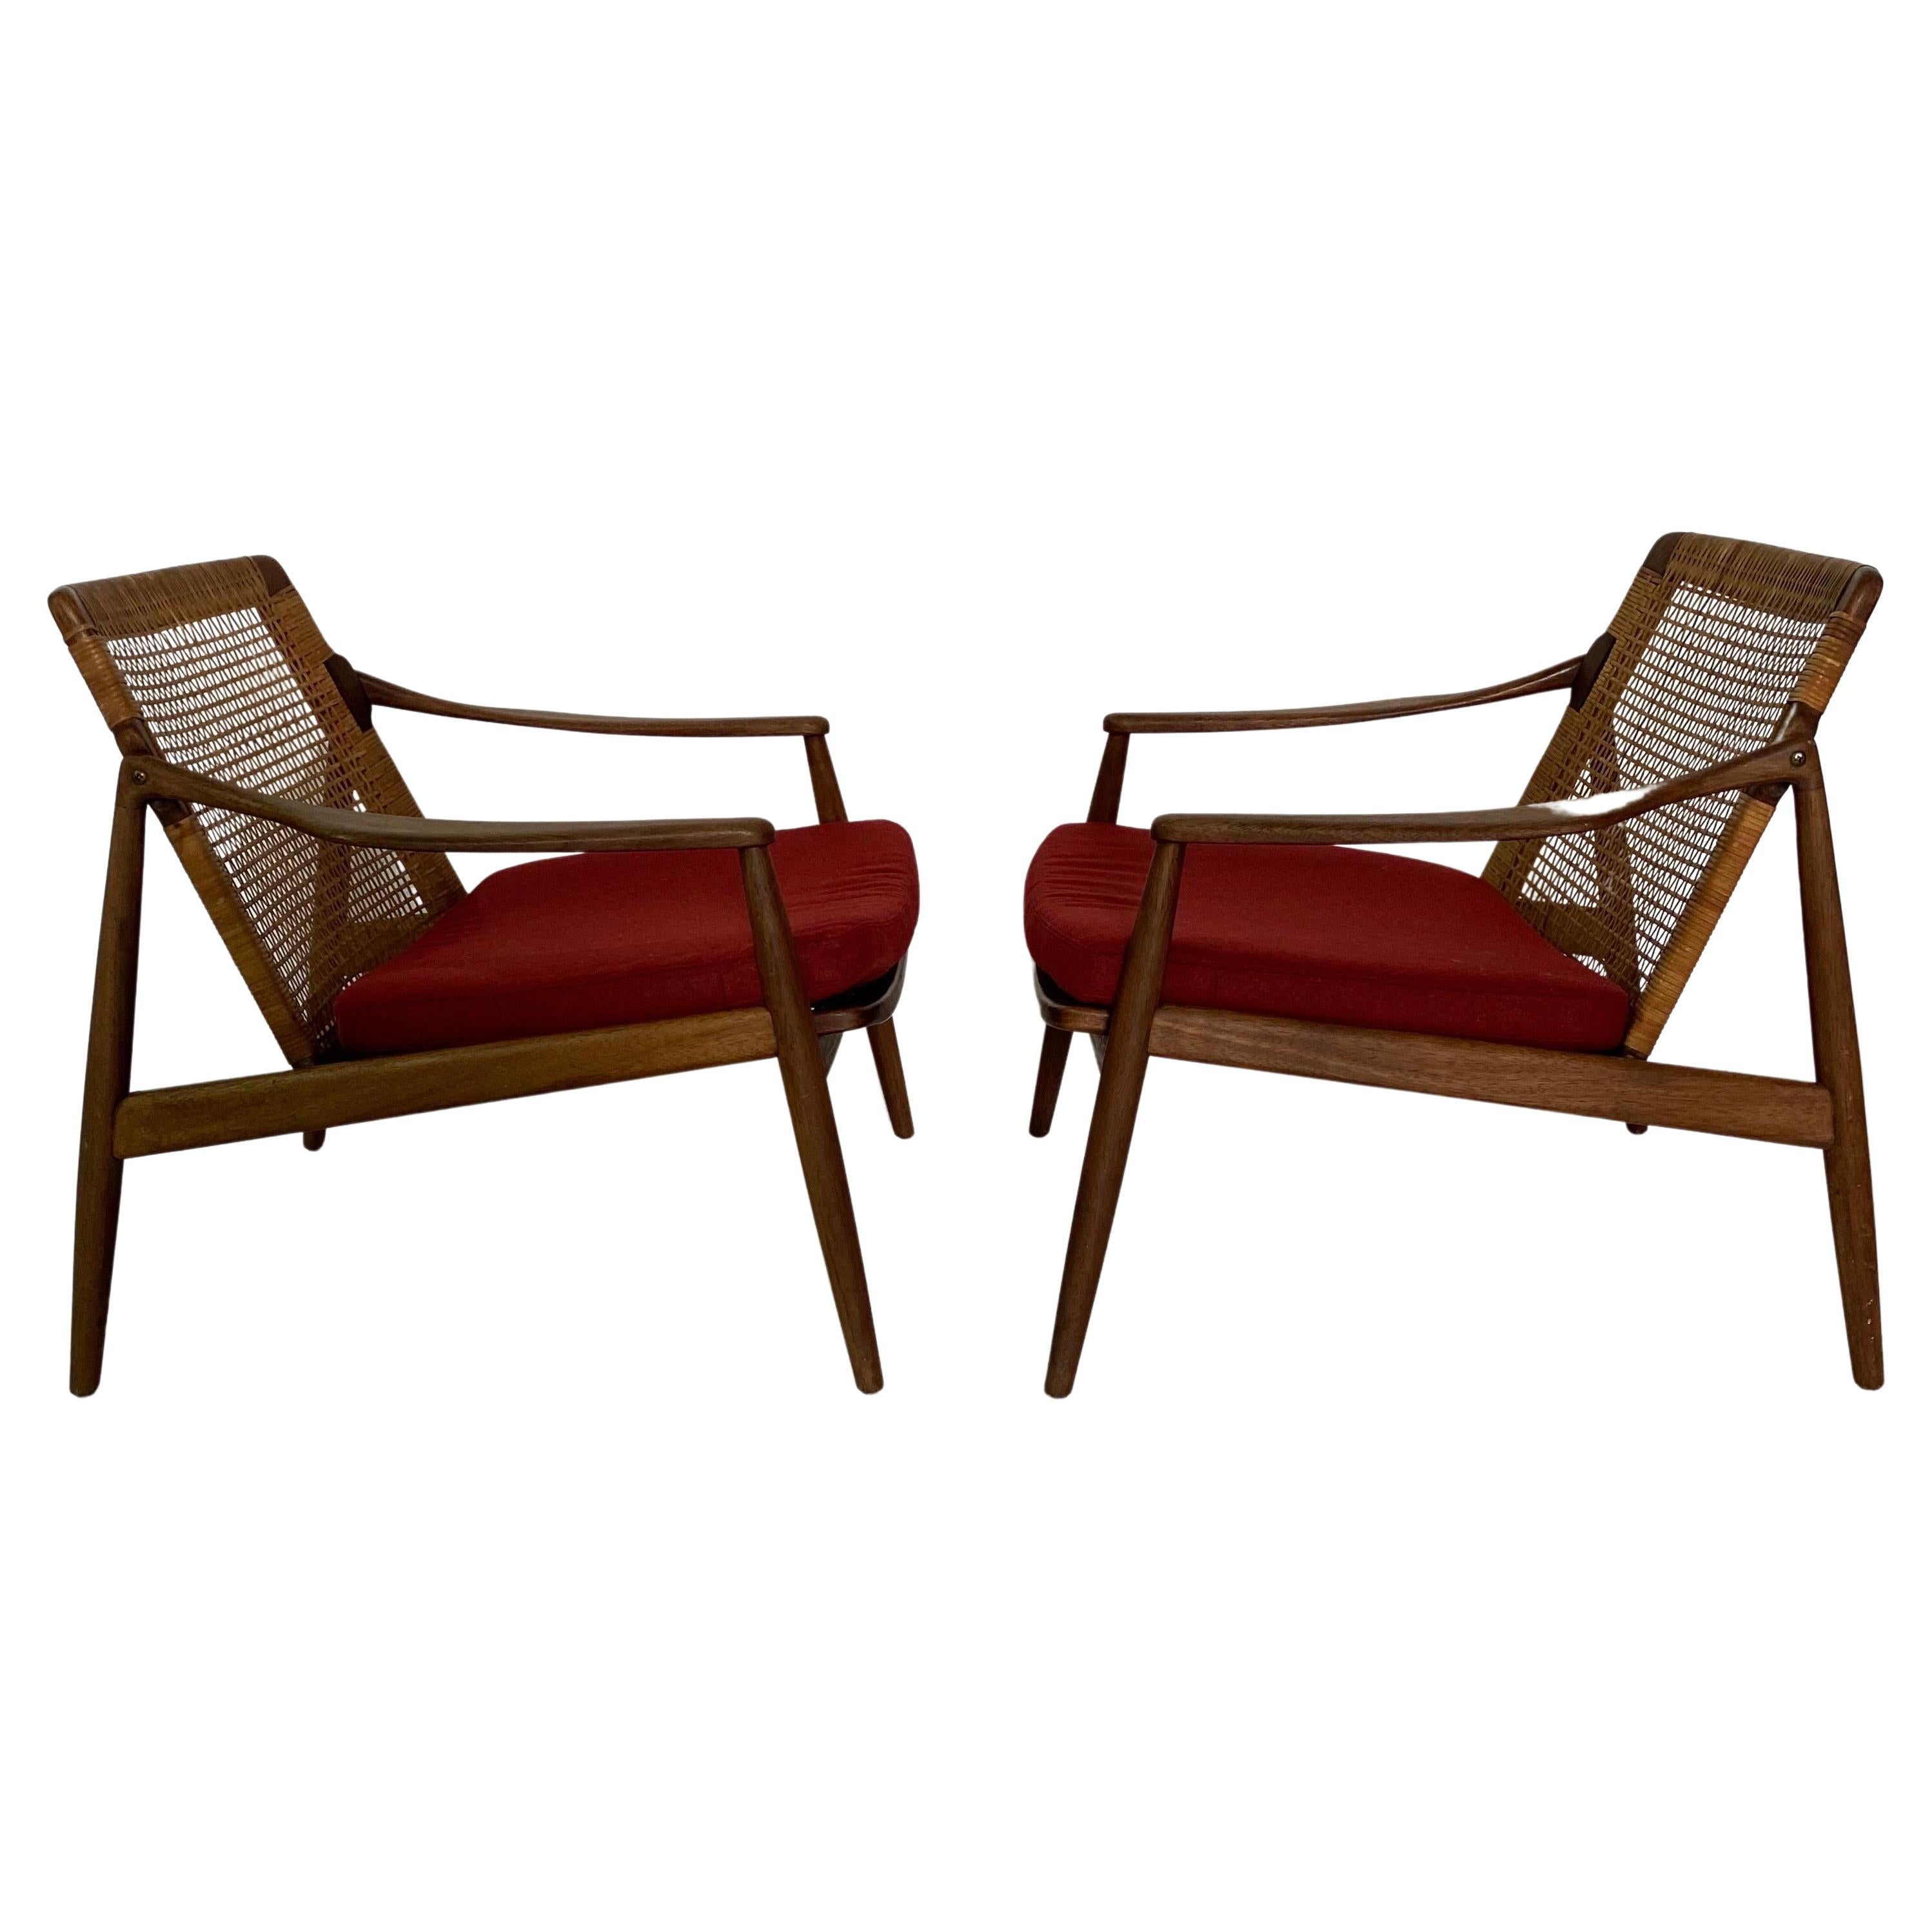 The model chairs '400' a Museological quality Mid-Century design and due to it's timeless beauty still much sought after today a real collector's item the set of two lounge chairs designed by Hartmut Lohmeyer, 1956 in Germany produced by the company